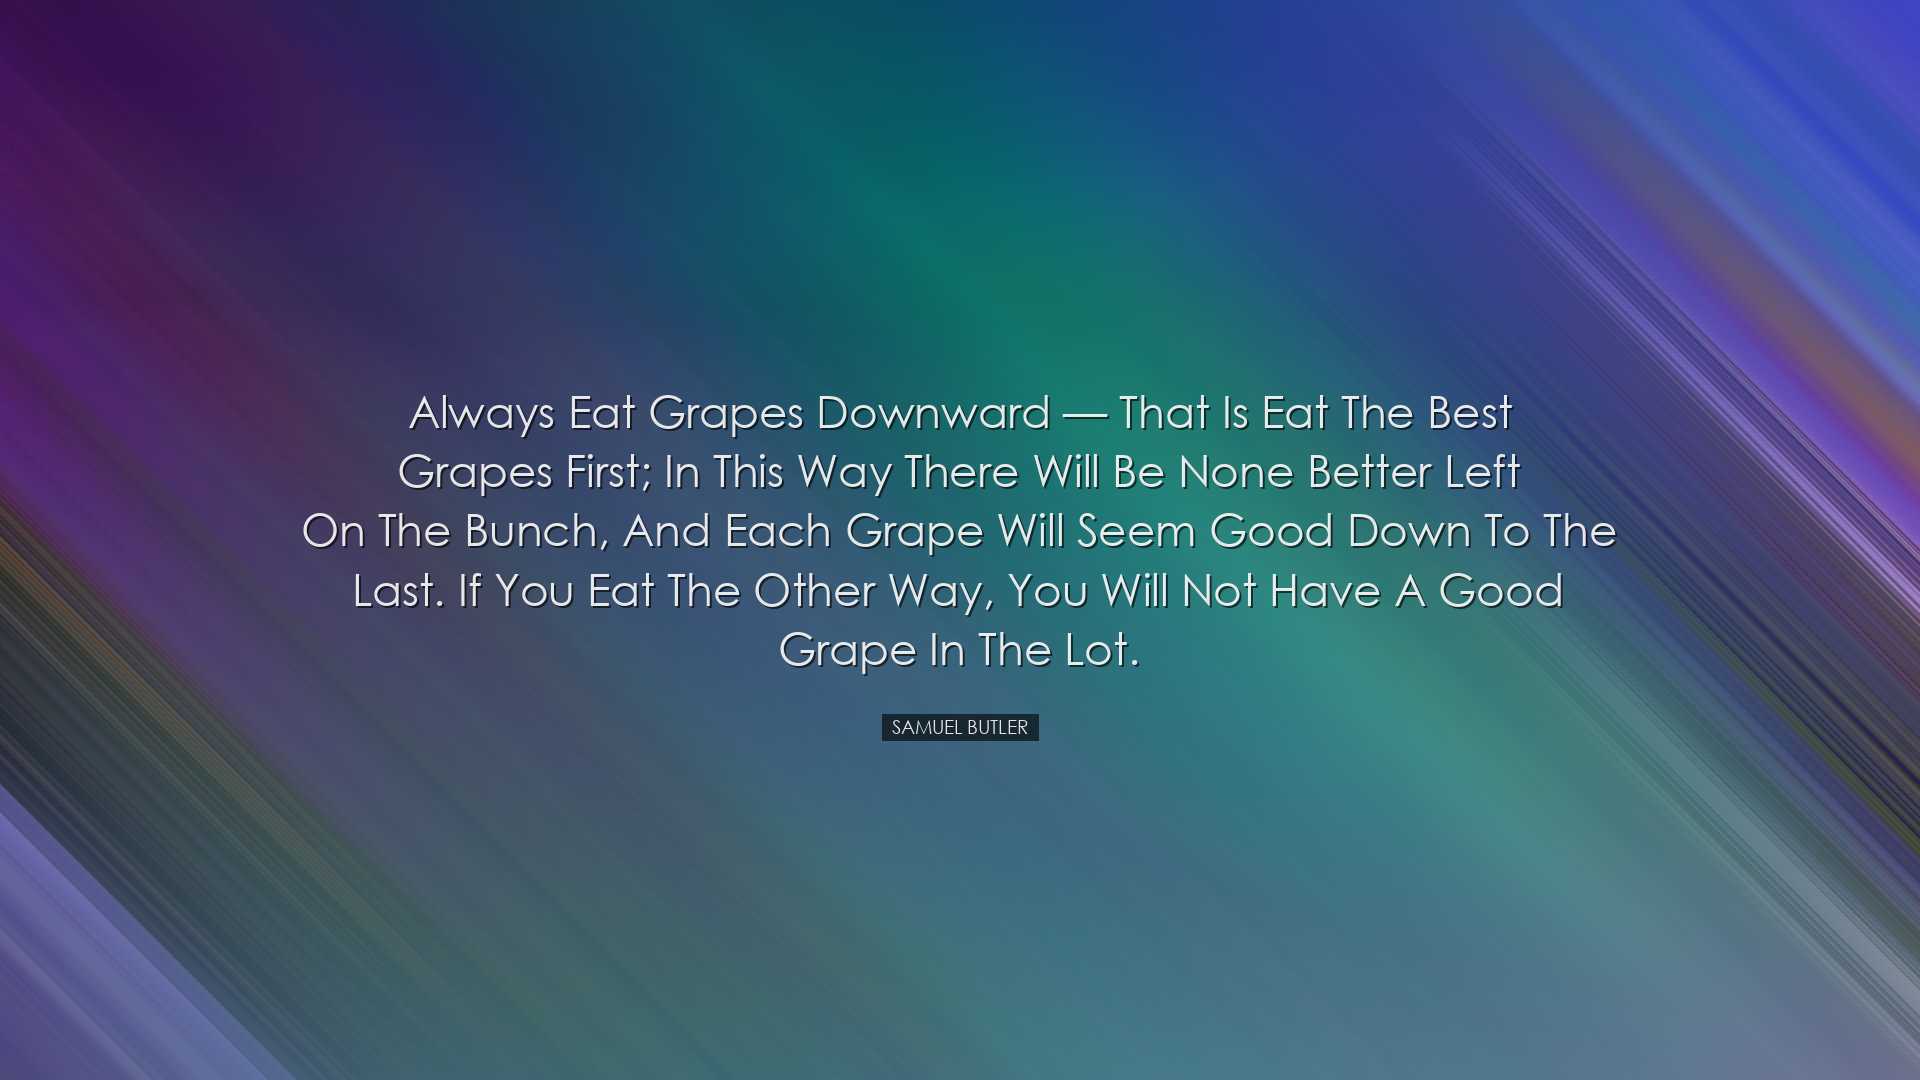 Always eat grapes downward — that is eat the best grapes fir